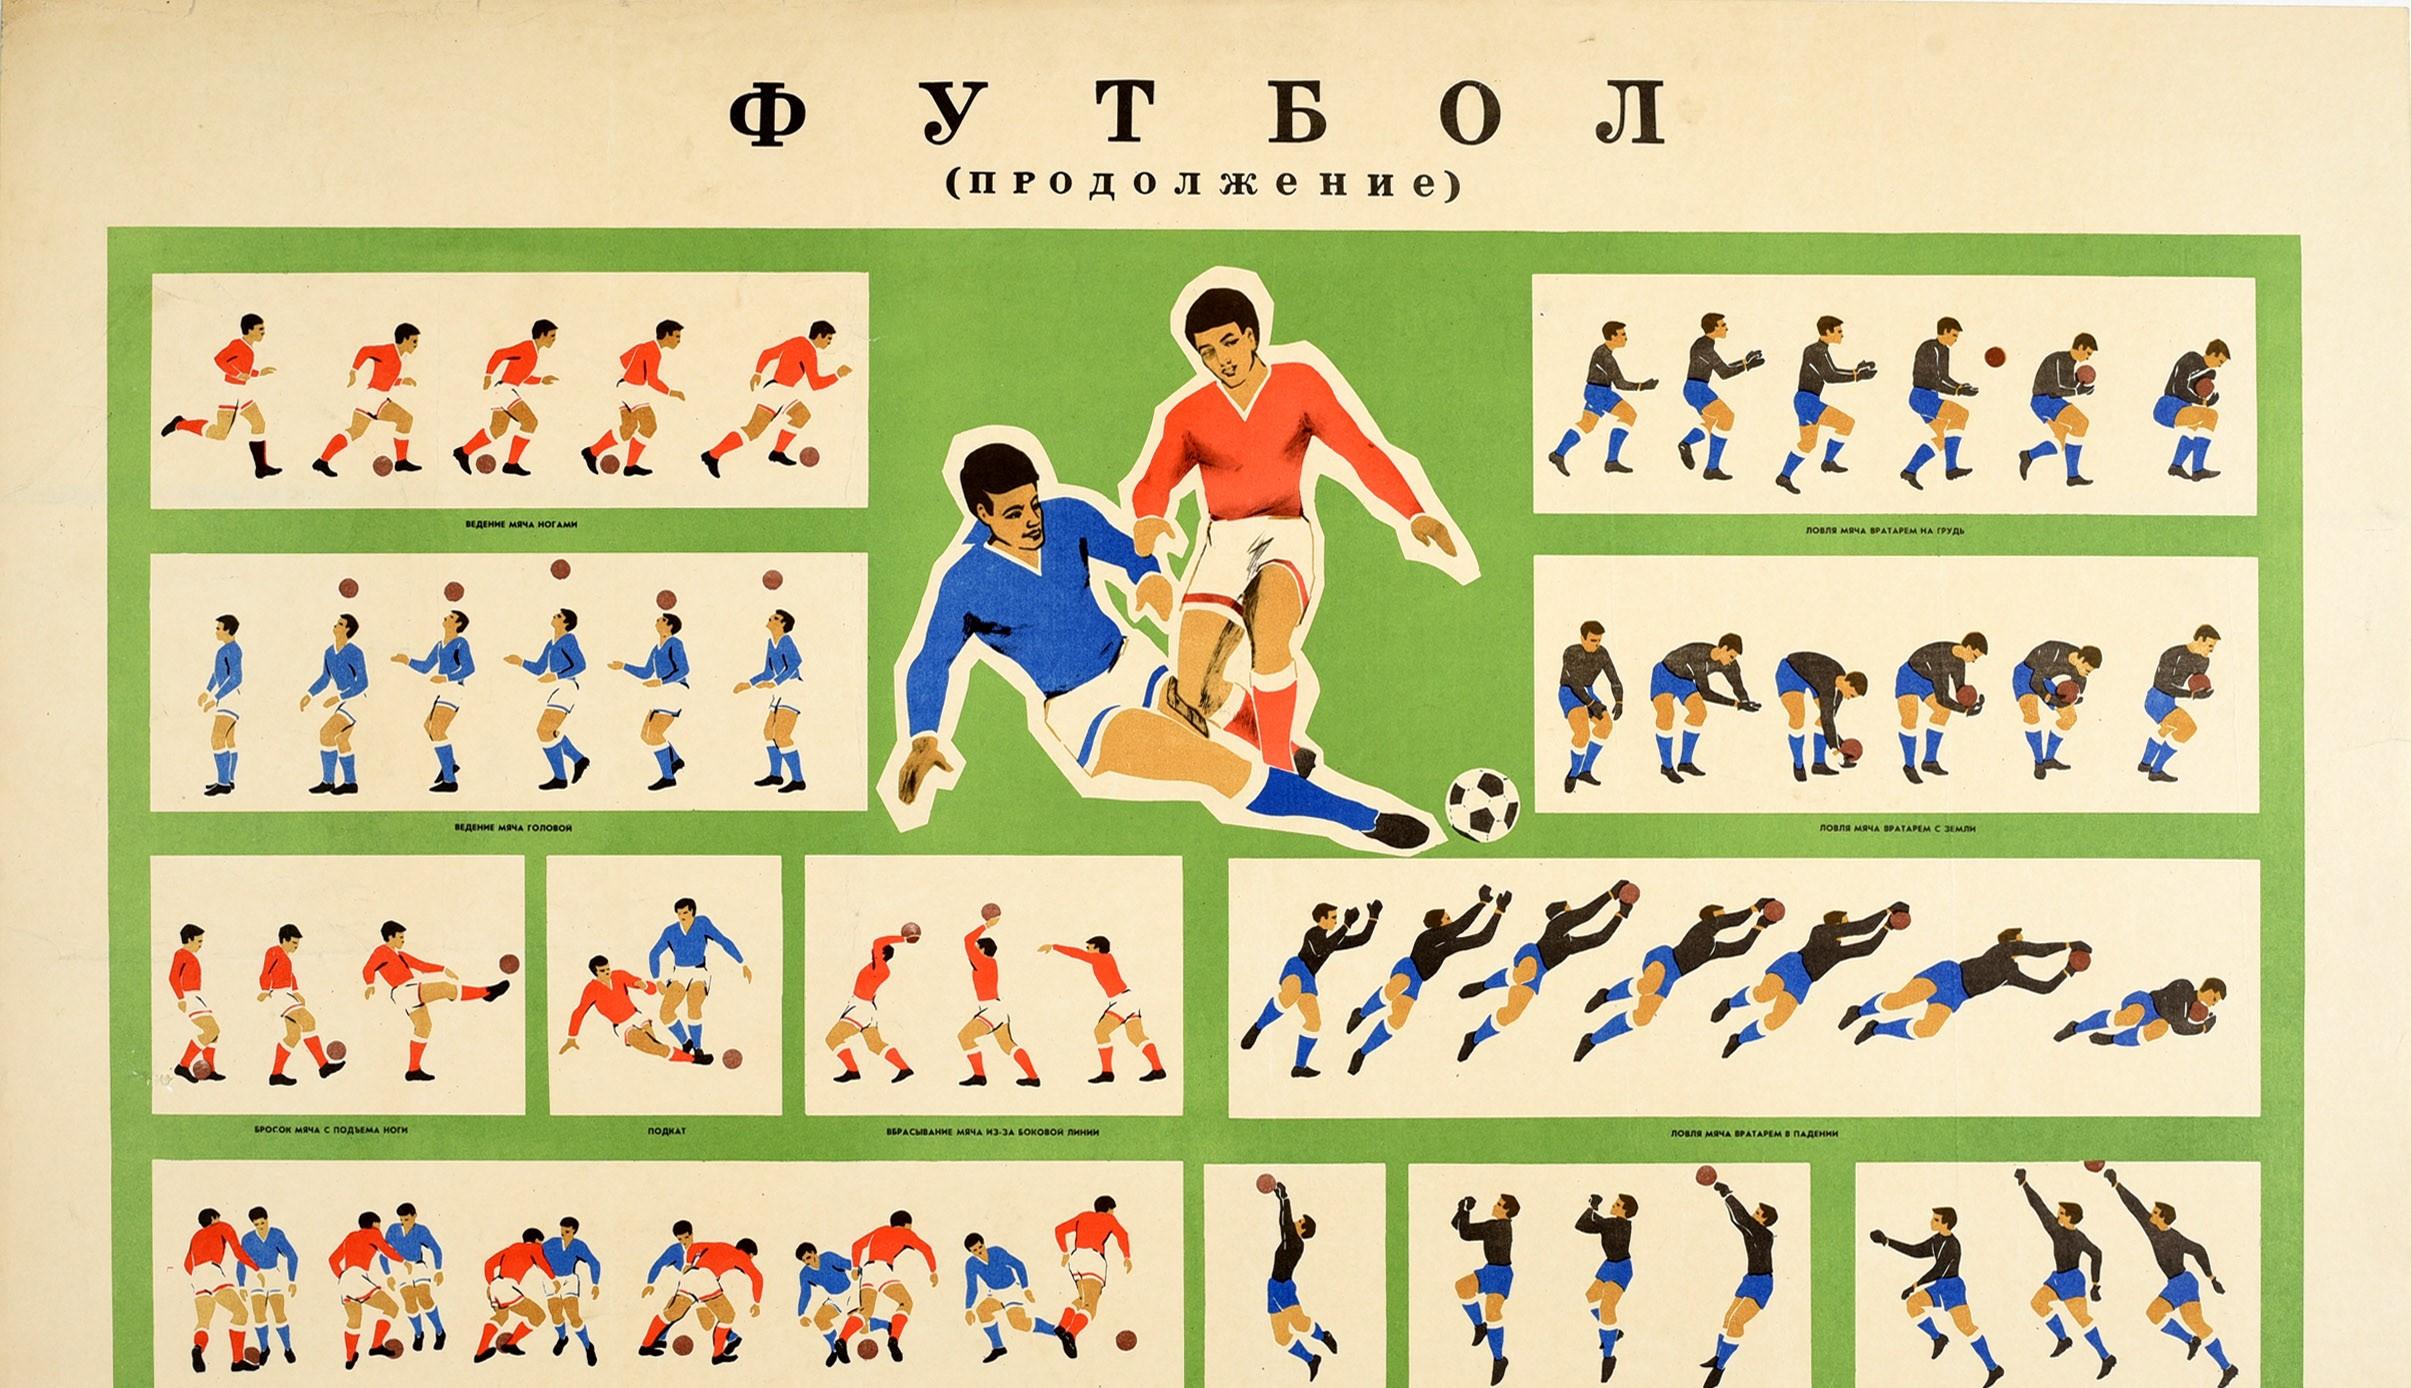 Original Vintage Sport Poster How To Play Football USSR Game Play Instructions - Print by Lyubonko